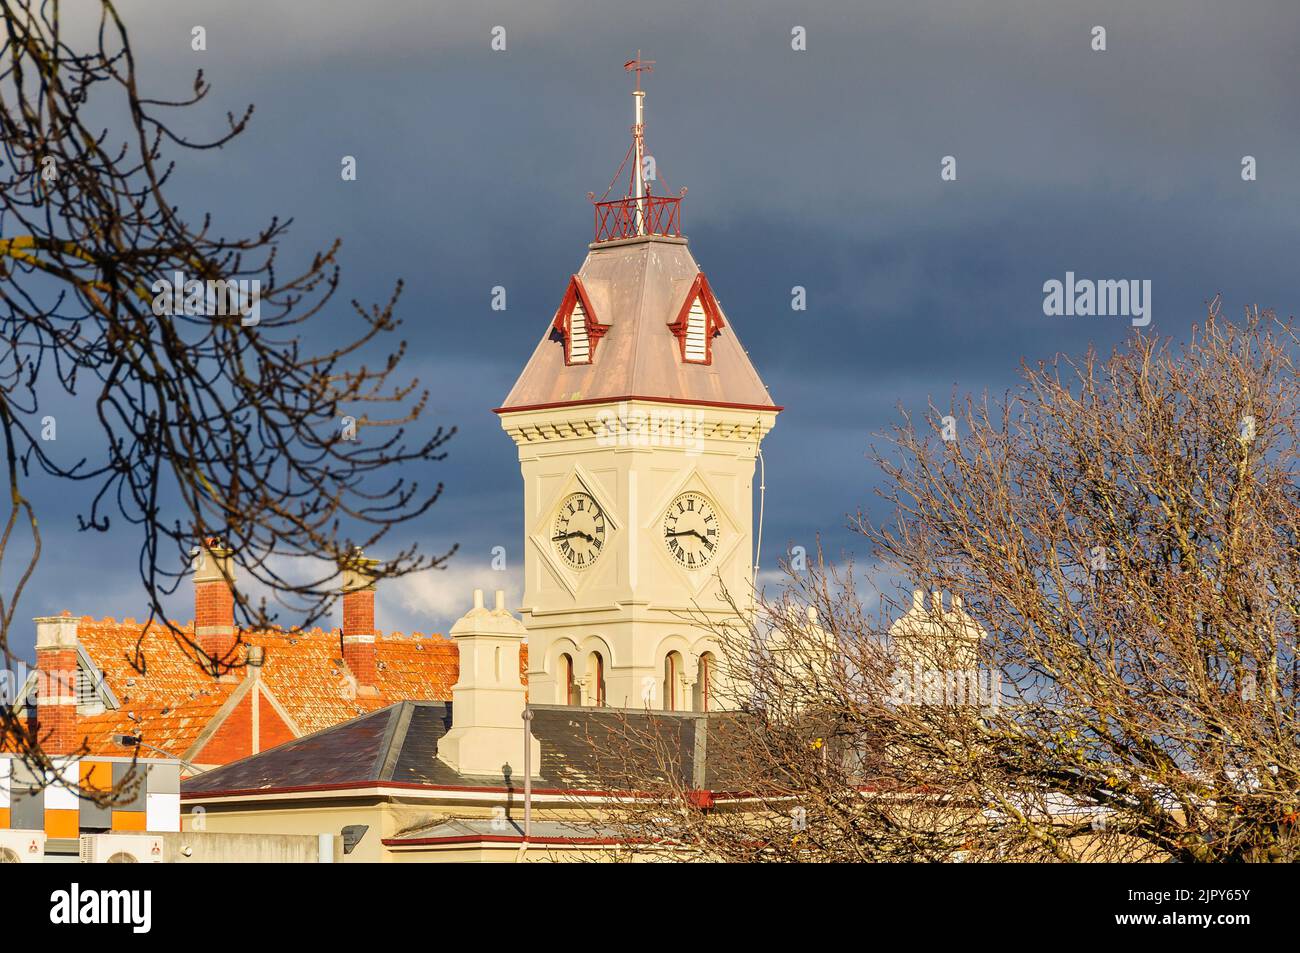 The clock tower of the Post Office lit by bright afternoon autumn sunshine - Kyneton, Victoria, Australia Stock Photo